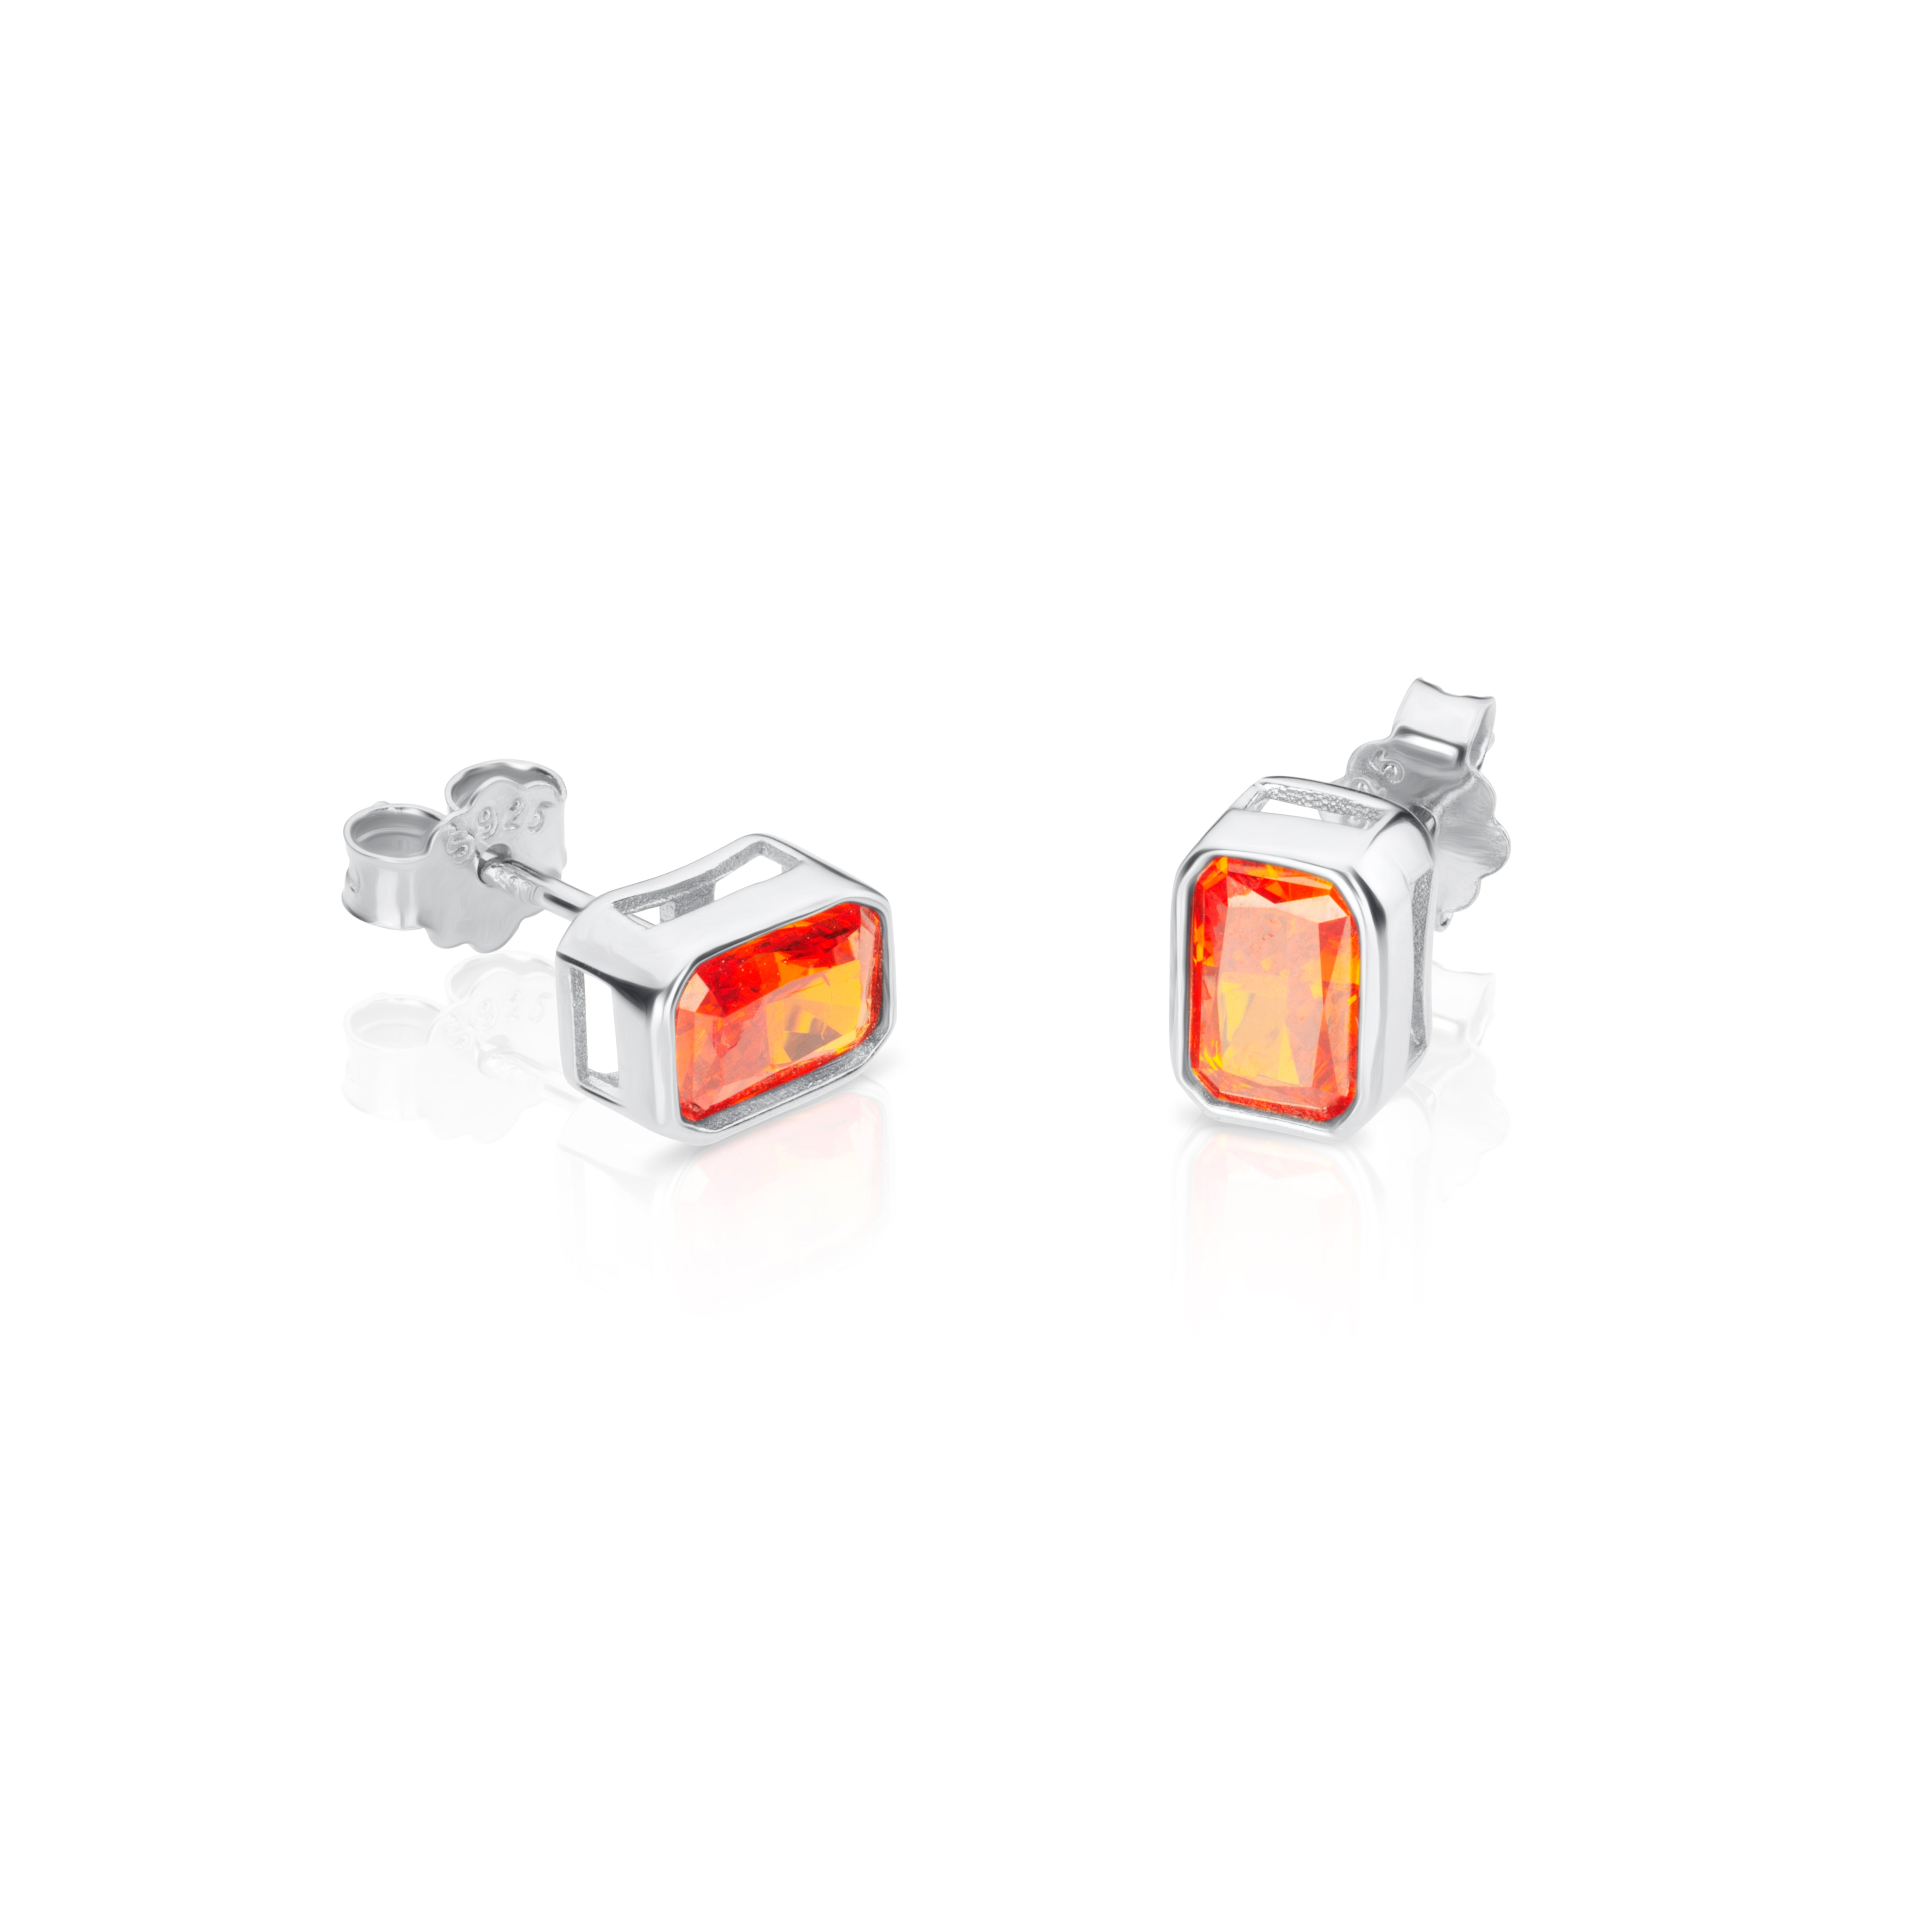 Crushed Ice Radiant Cut 925 Silver Earrings - 12 Colours!